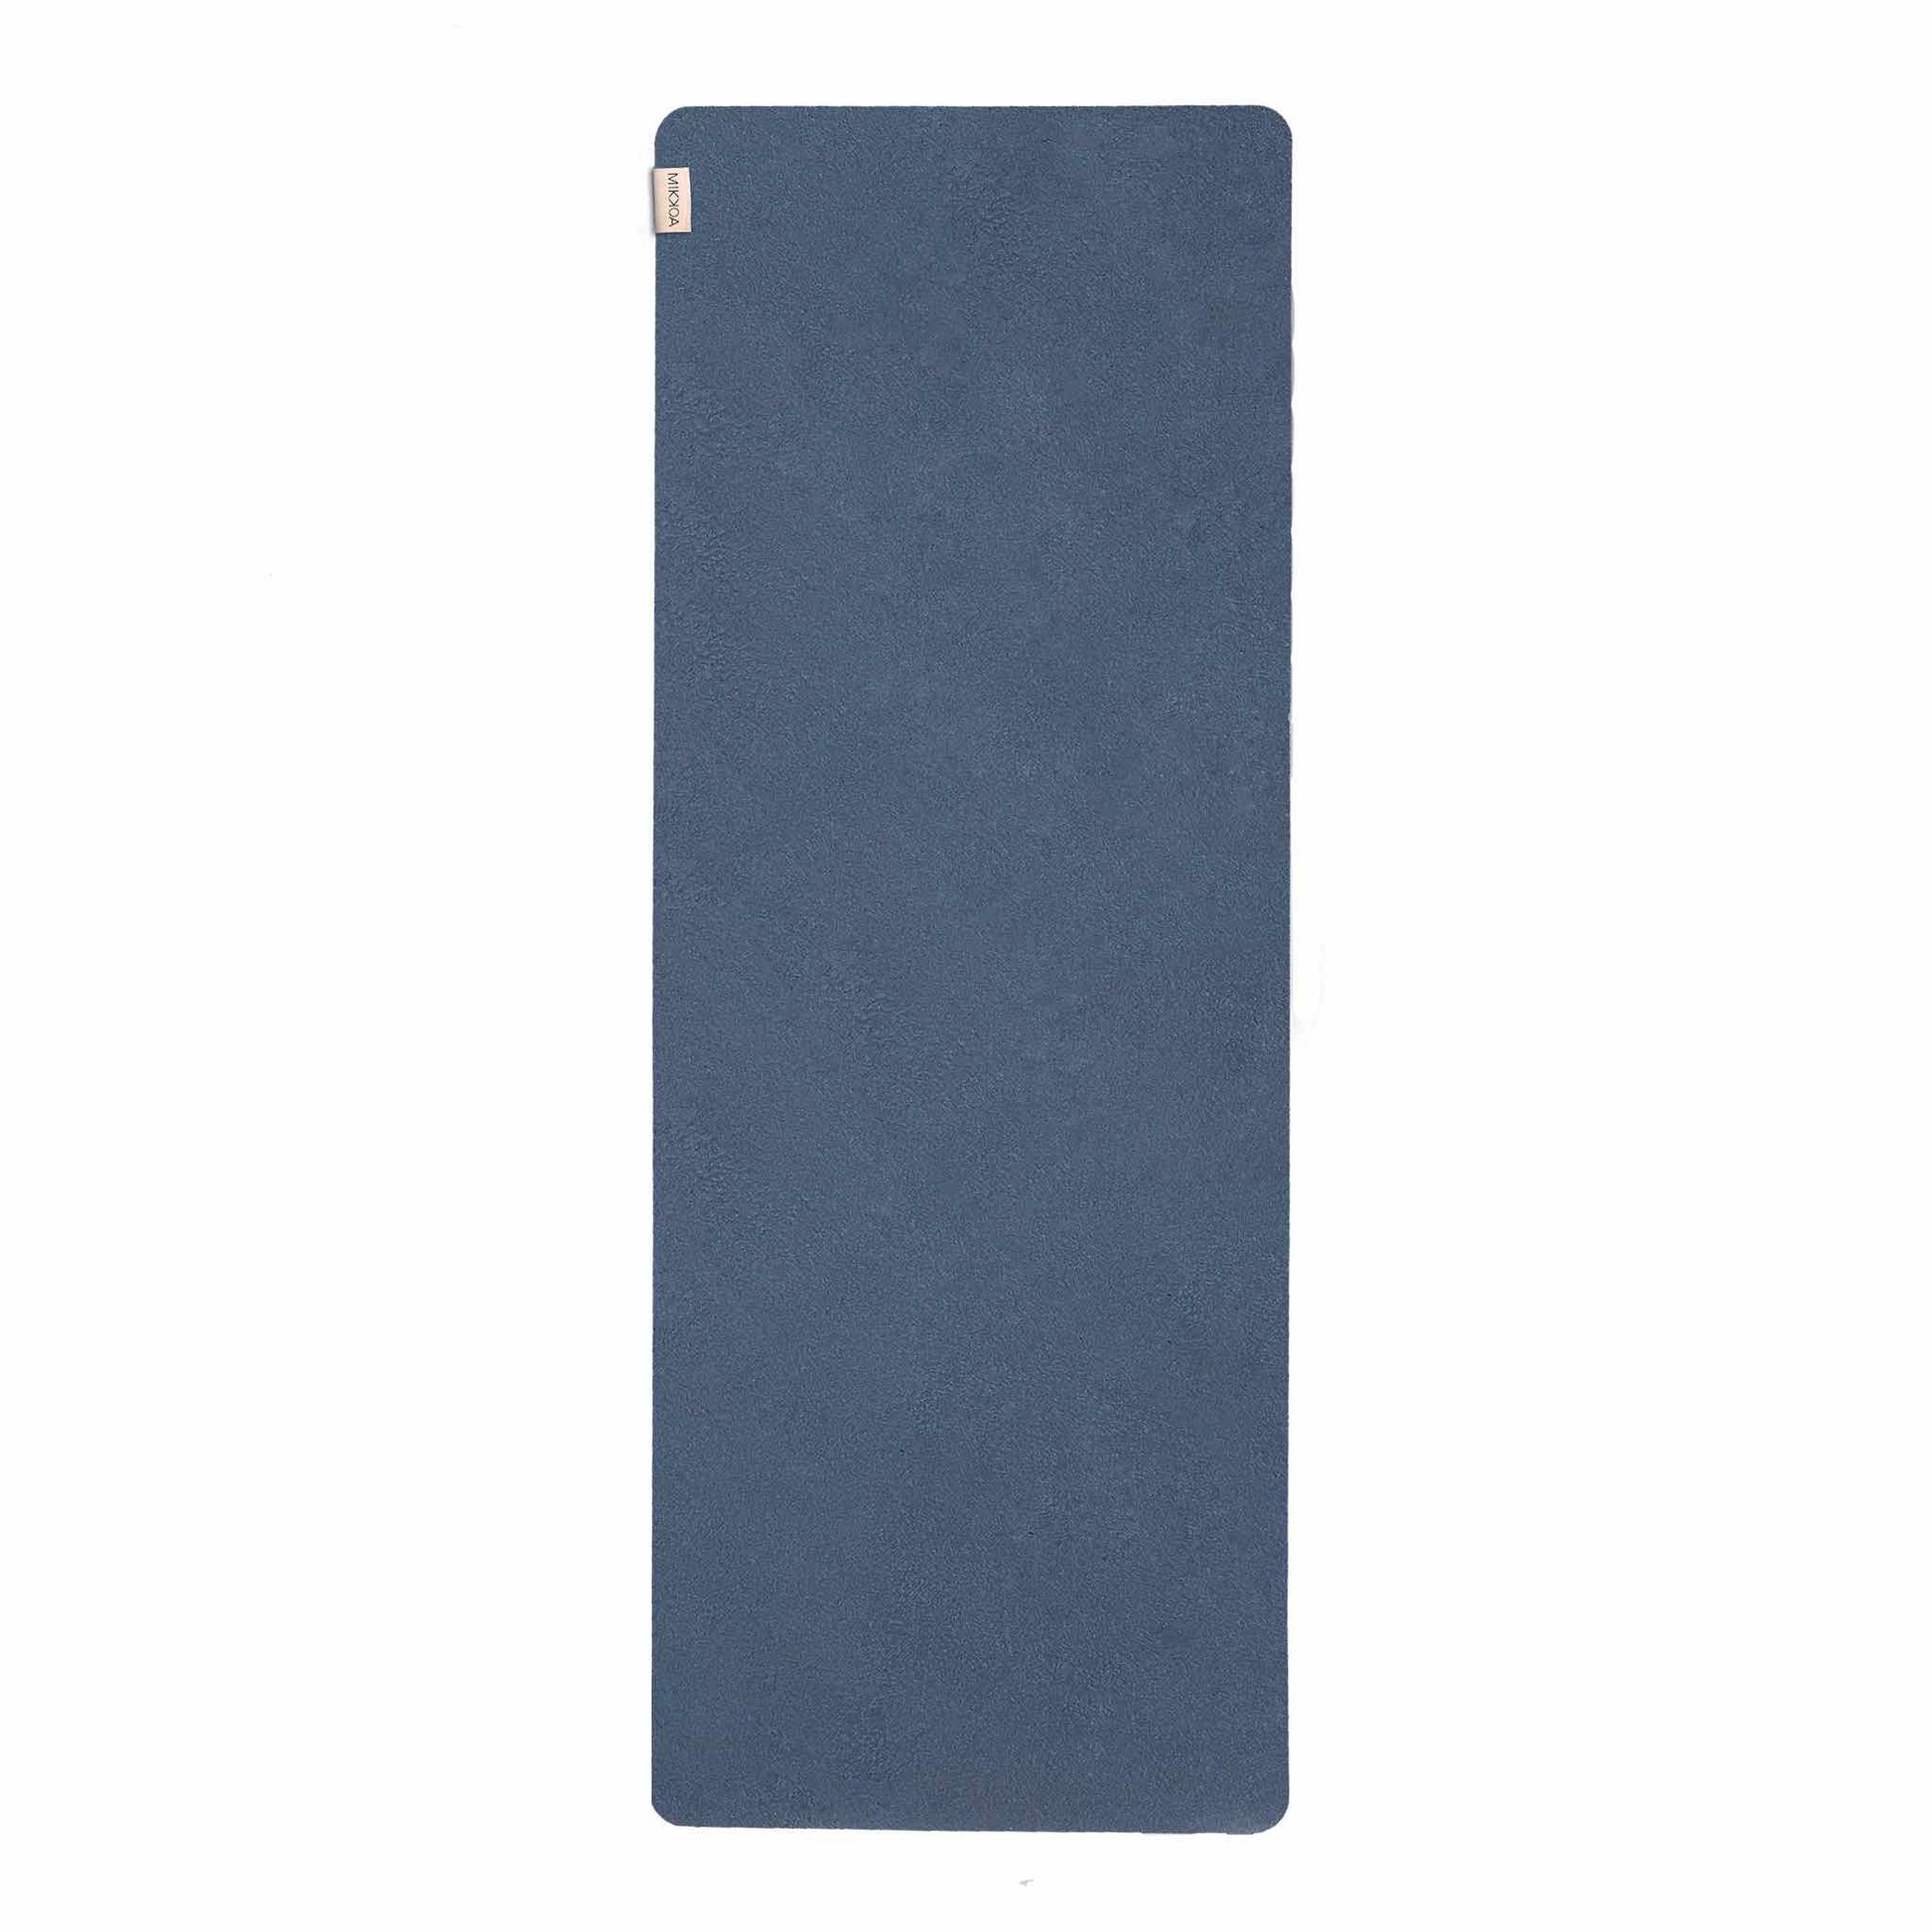 Am I allow to travel with a yoga mat strapped to the bottom of my backpack,  up to the plane/cabin ? The yoga mat weights about 3.9 pounds and  dimensions are L